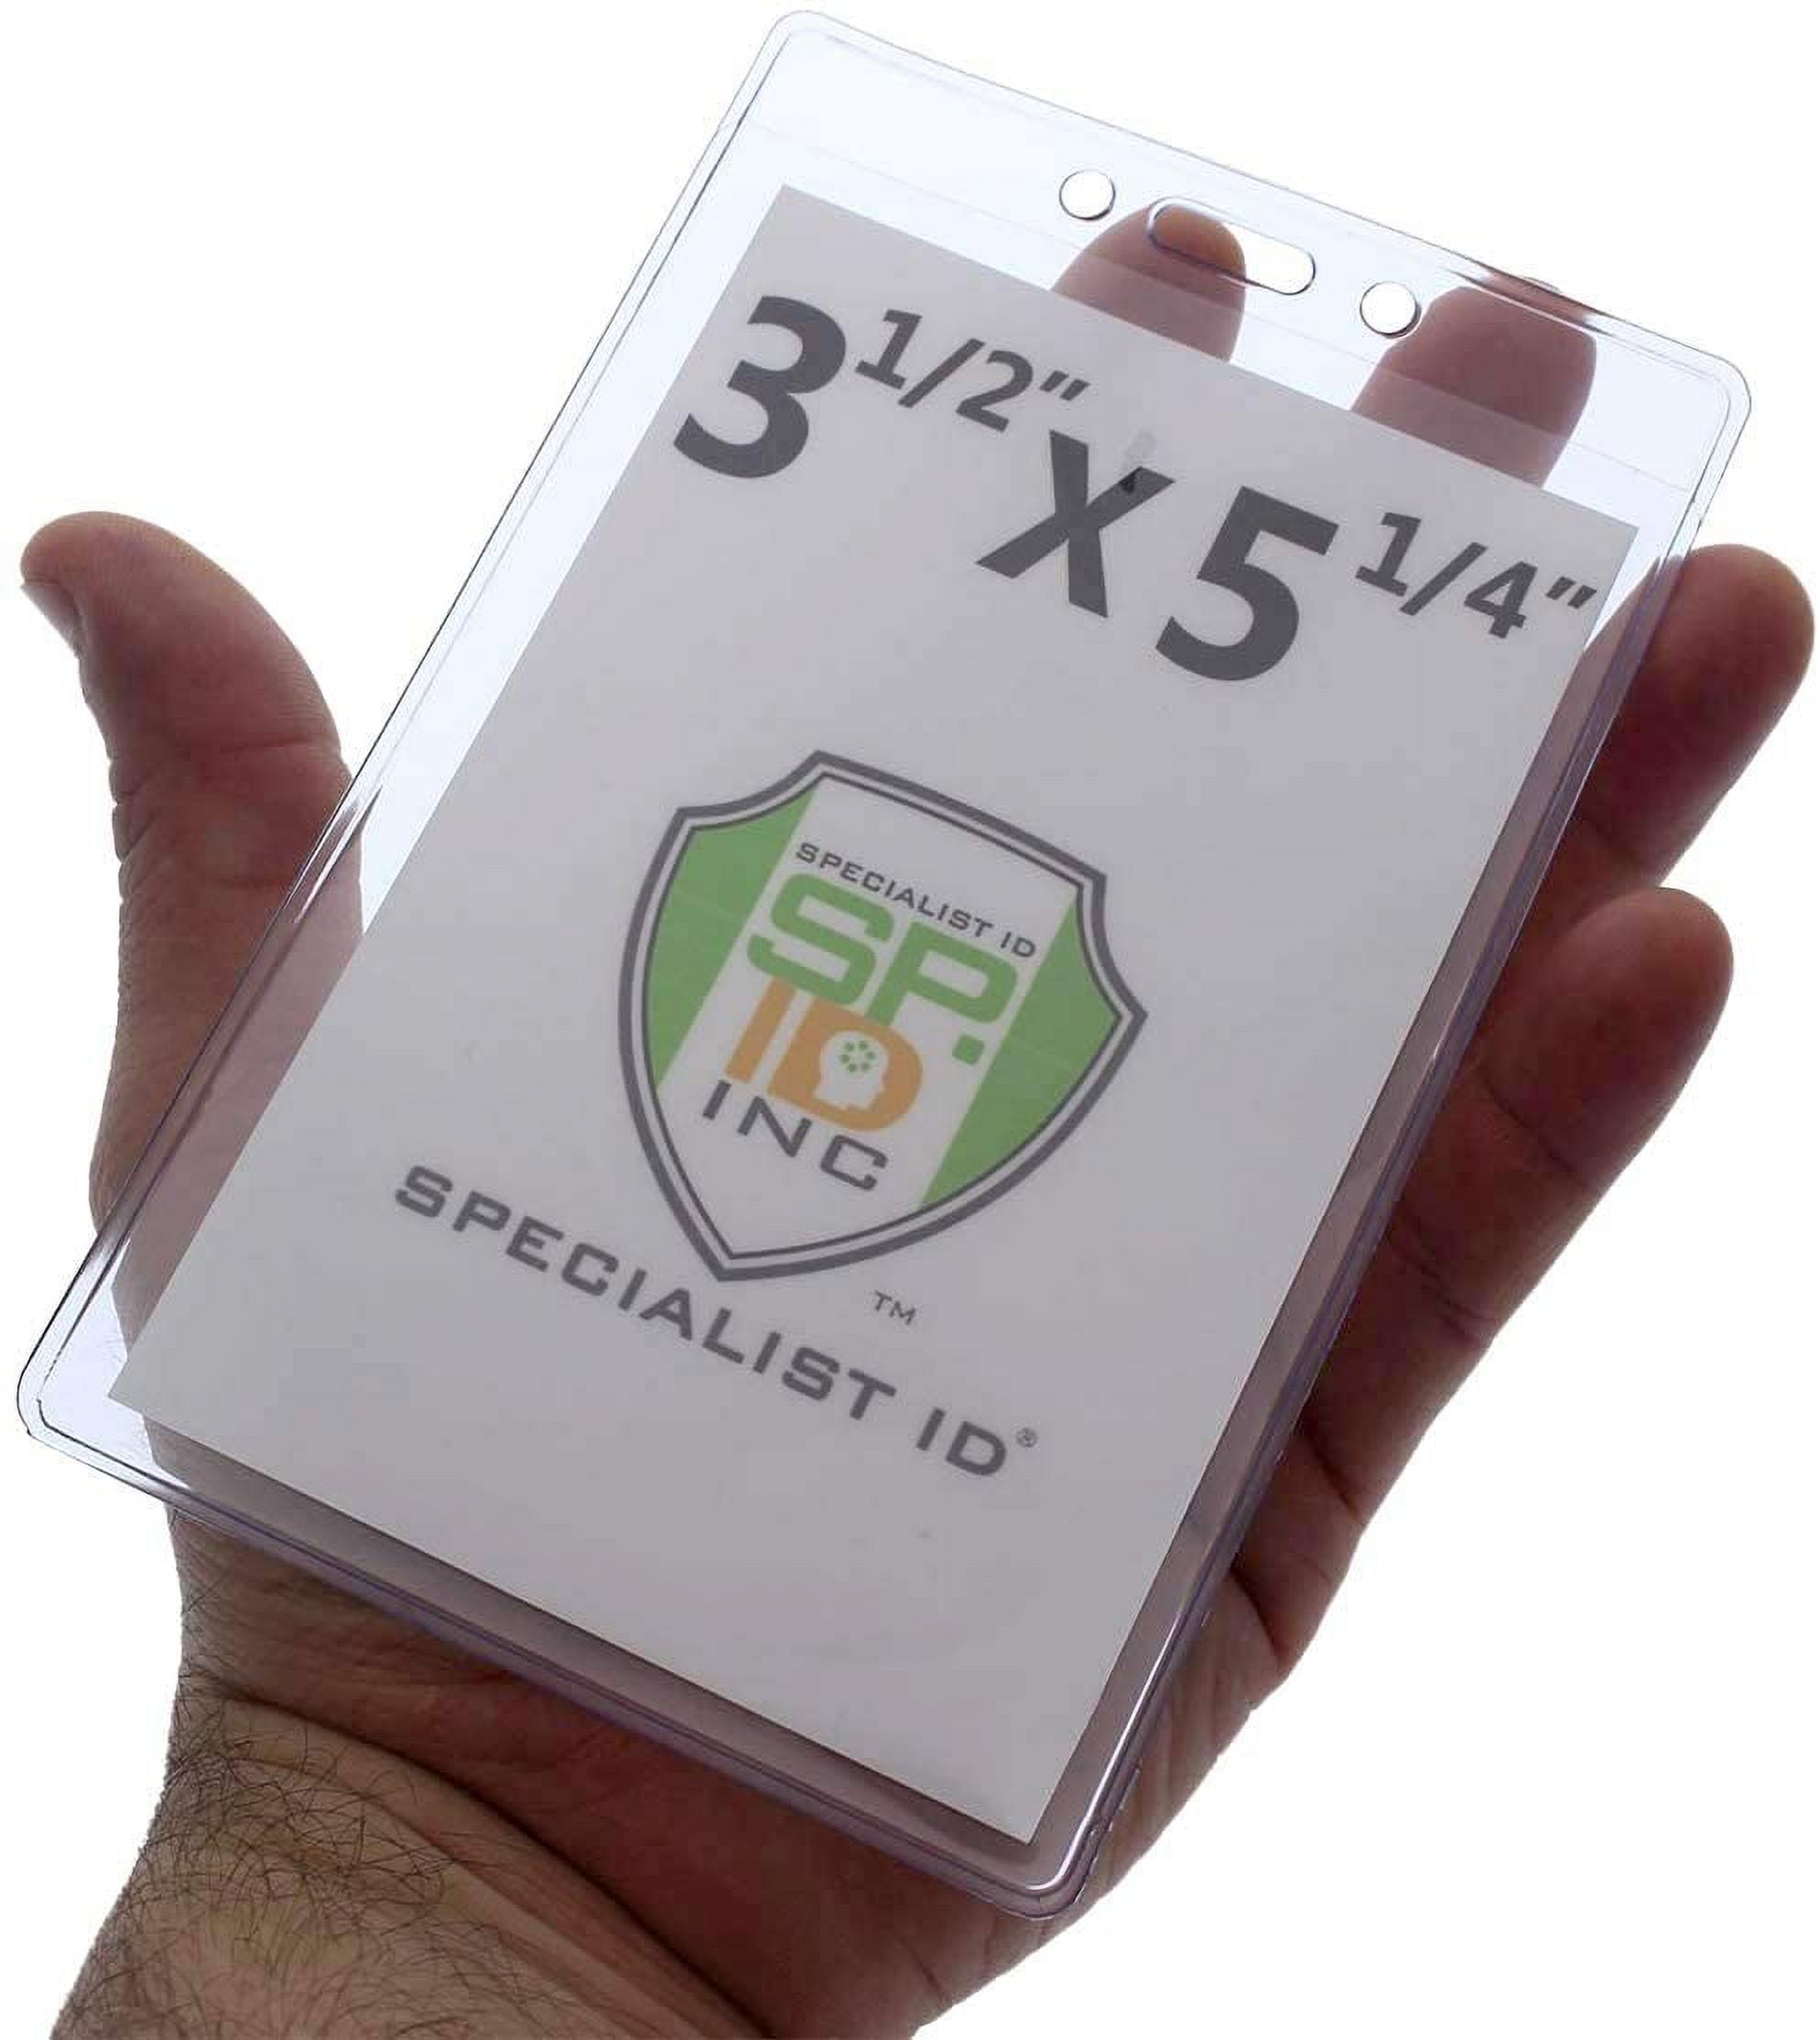 Premium Heavy Duty 3 1/2 X 5 1/4 Extra Large Event Badge Holder (4X6  Outside) by Specialsit ID, Sold Individually 